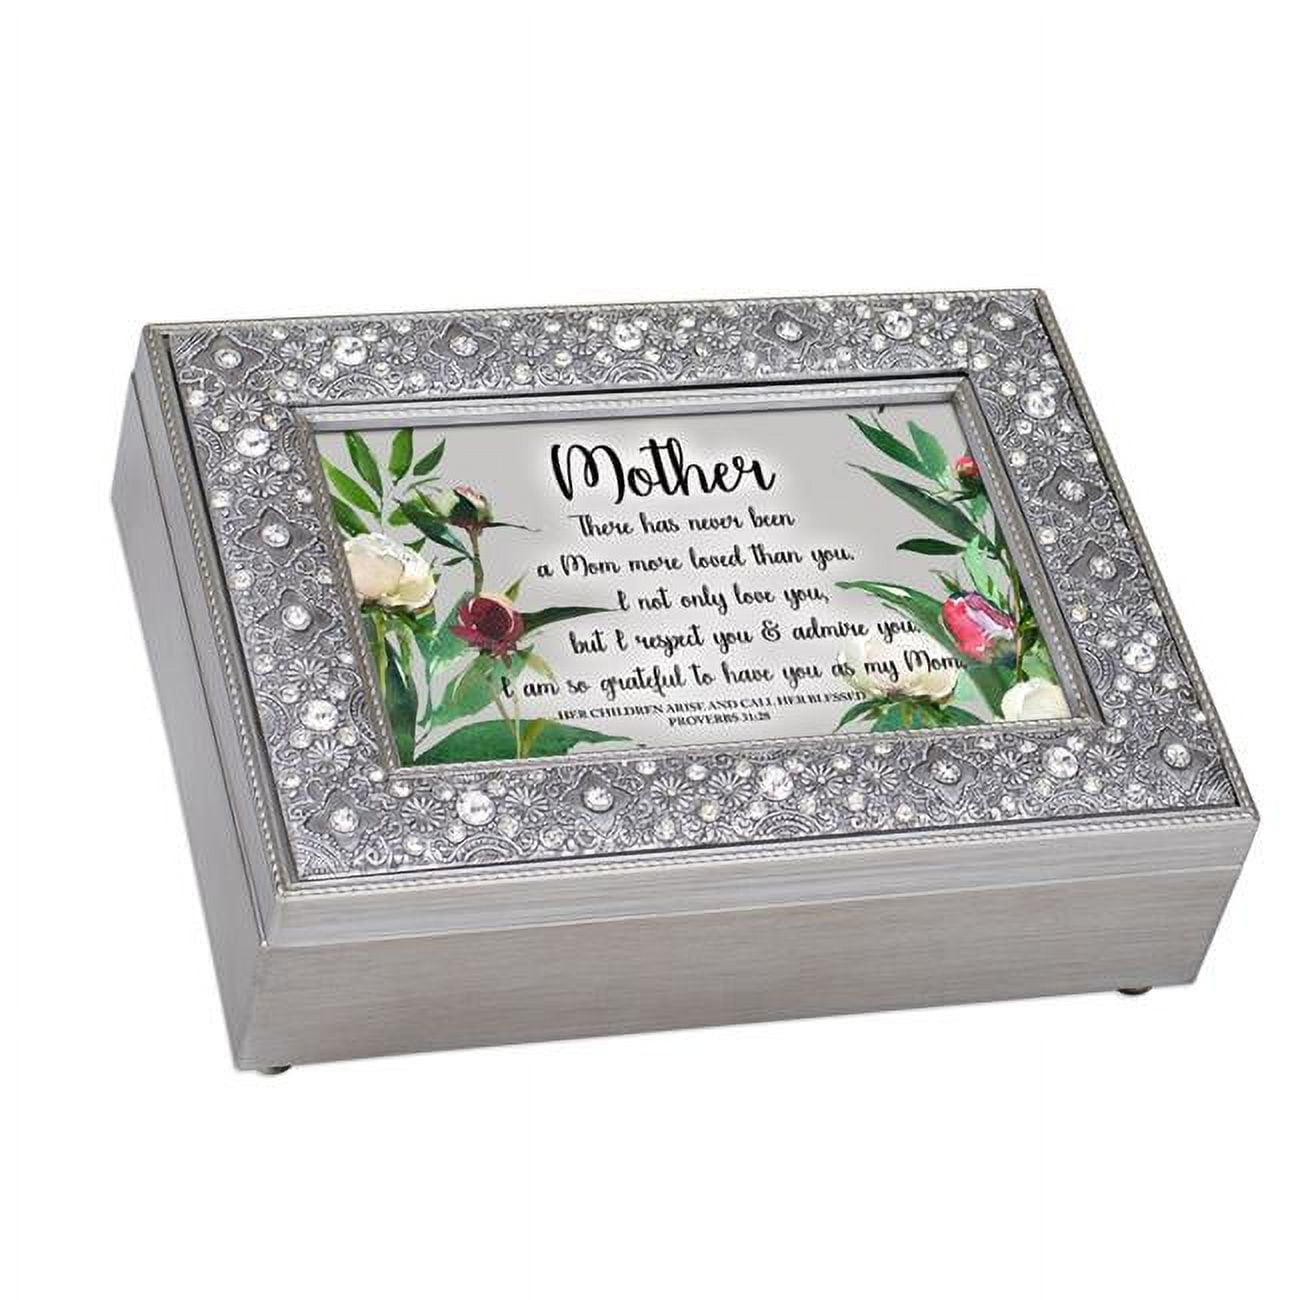 FM185SGB 6 x 4 in. Mother, More Loved Than You Proverbs 31-28 Music Box -  Cottage Garden